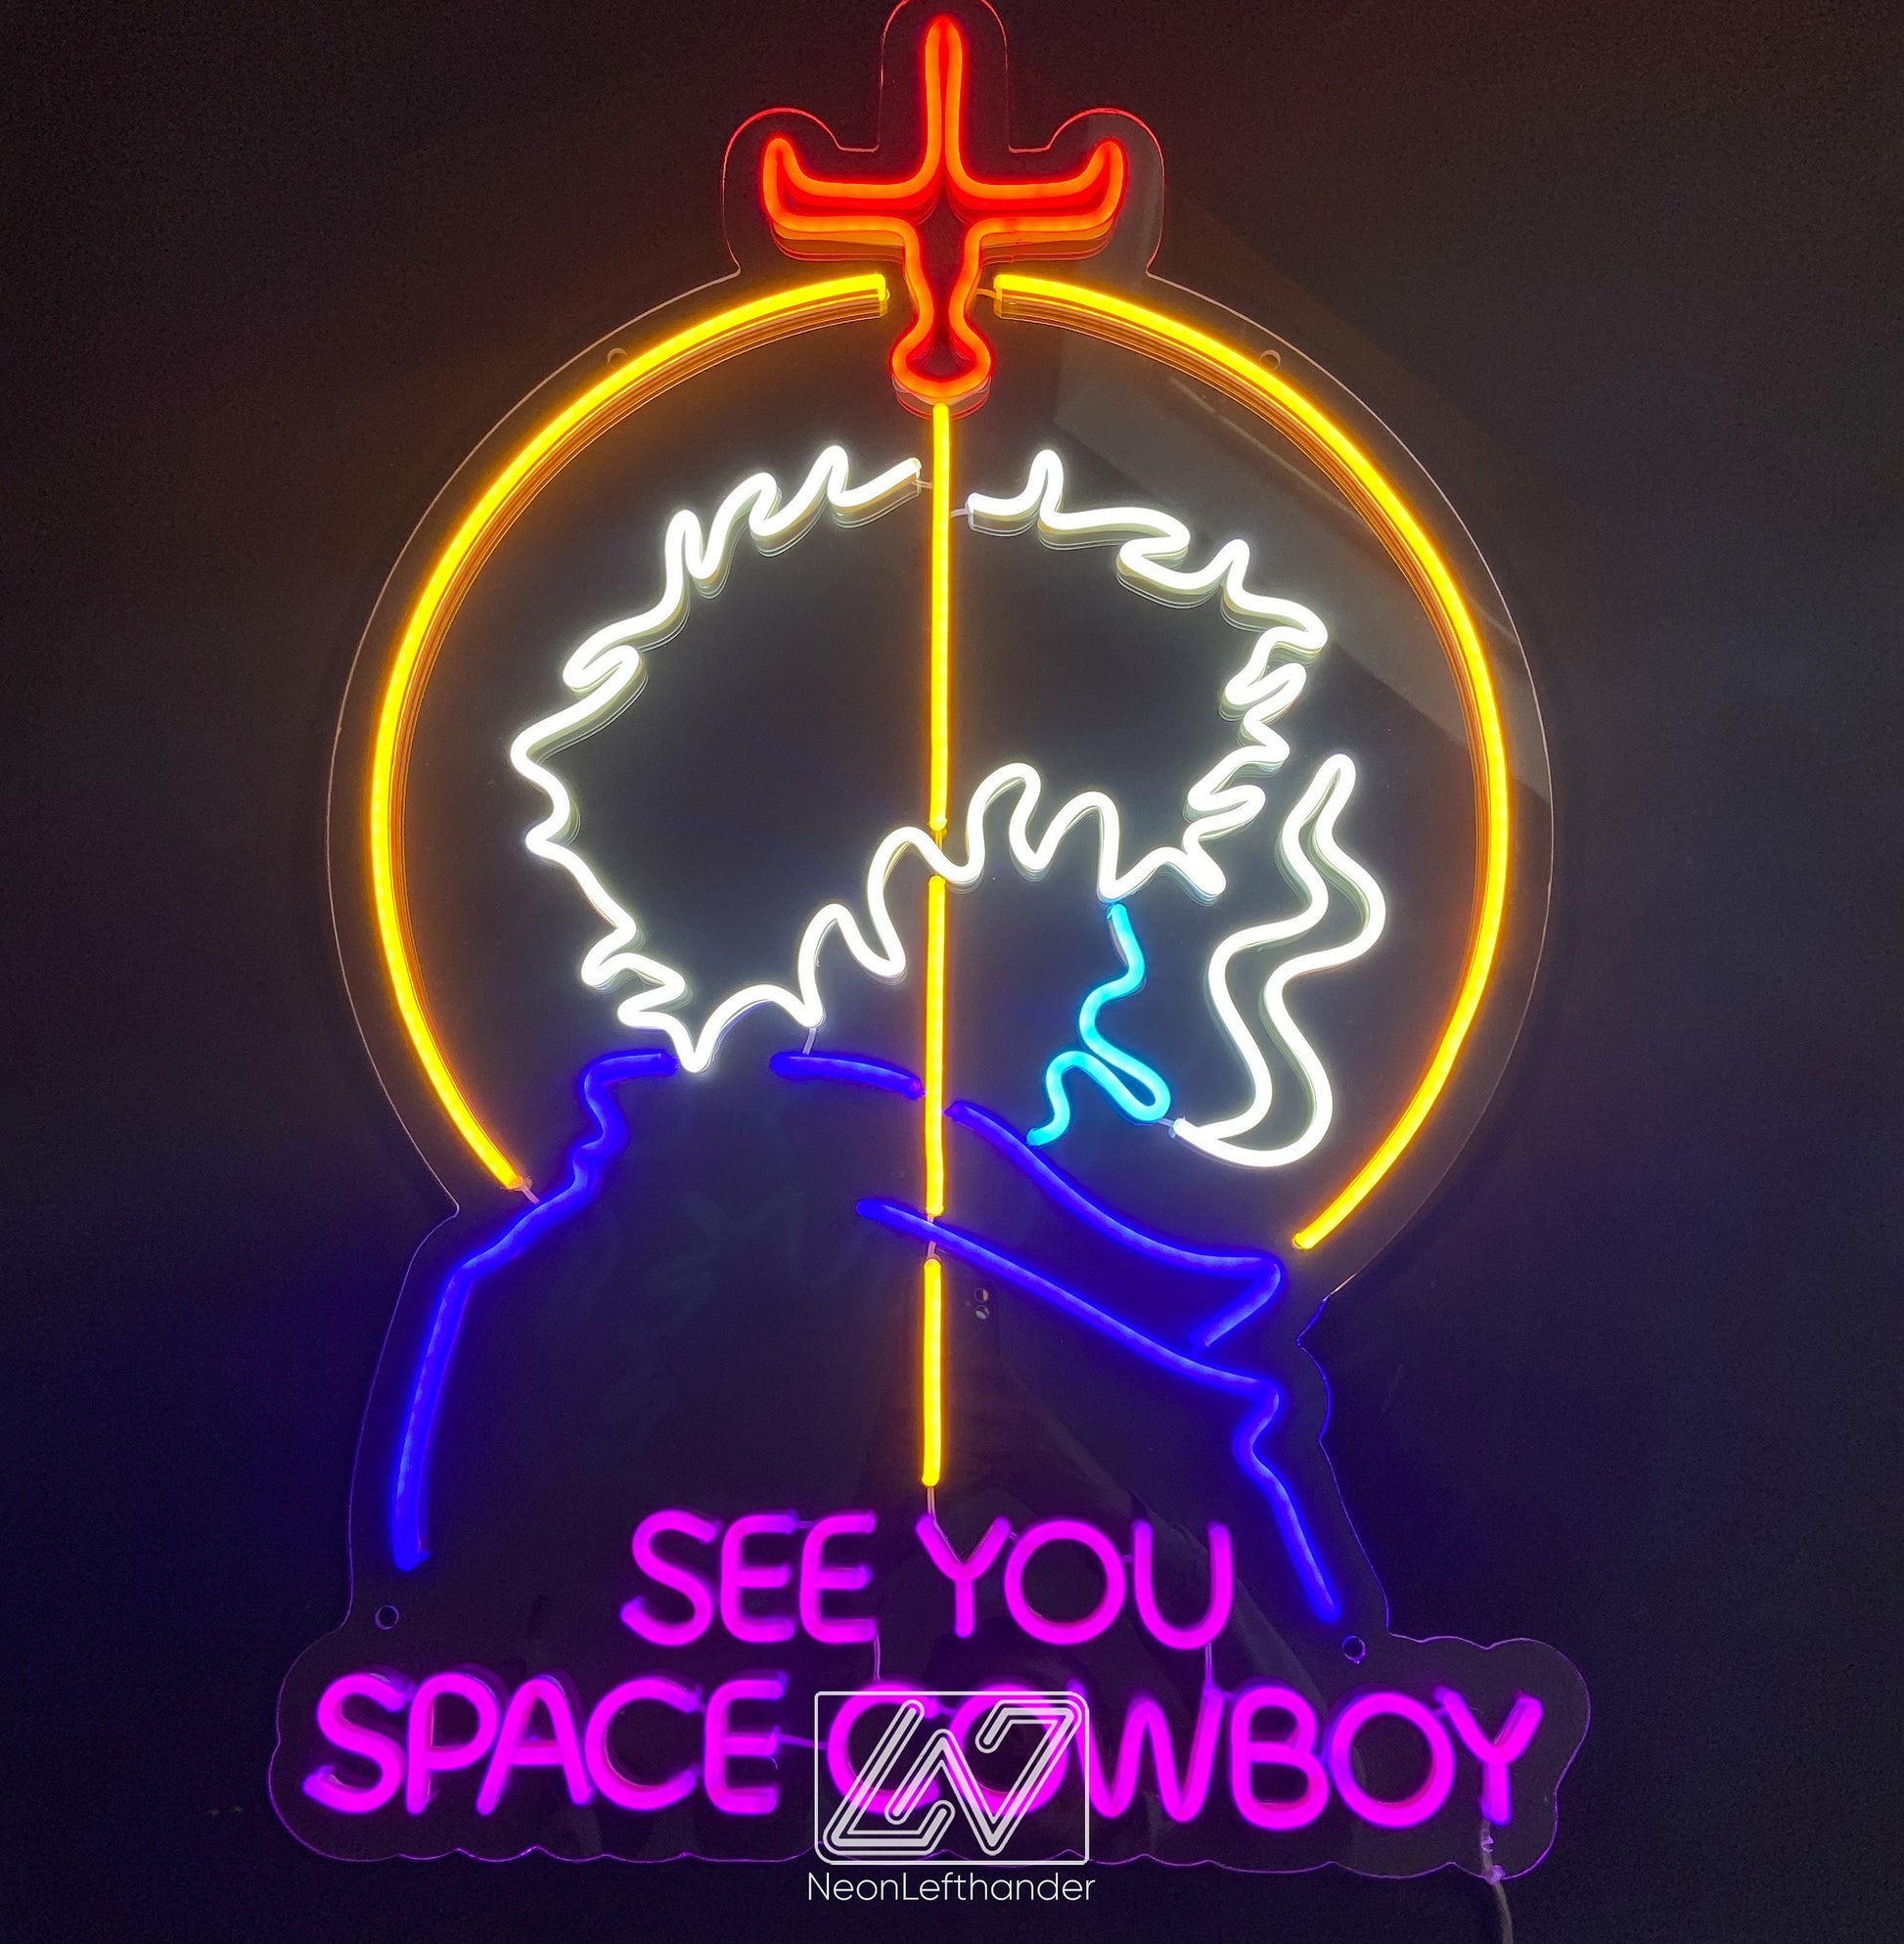 Cowboy - LED Neon Anime Wall Art, Anime, Cartoon Character, Game Room Light, Personalized Gifts, Kids Room Decor, See You Space Cowboy